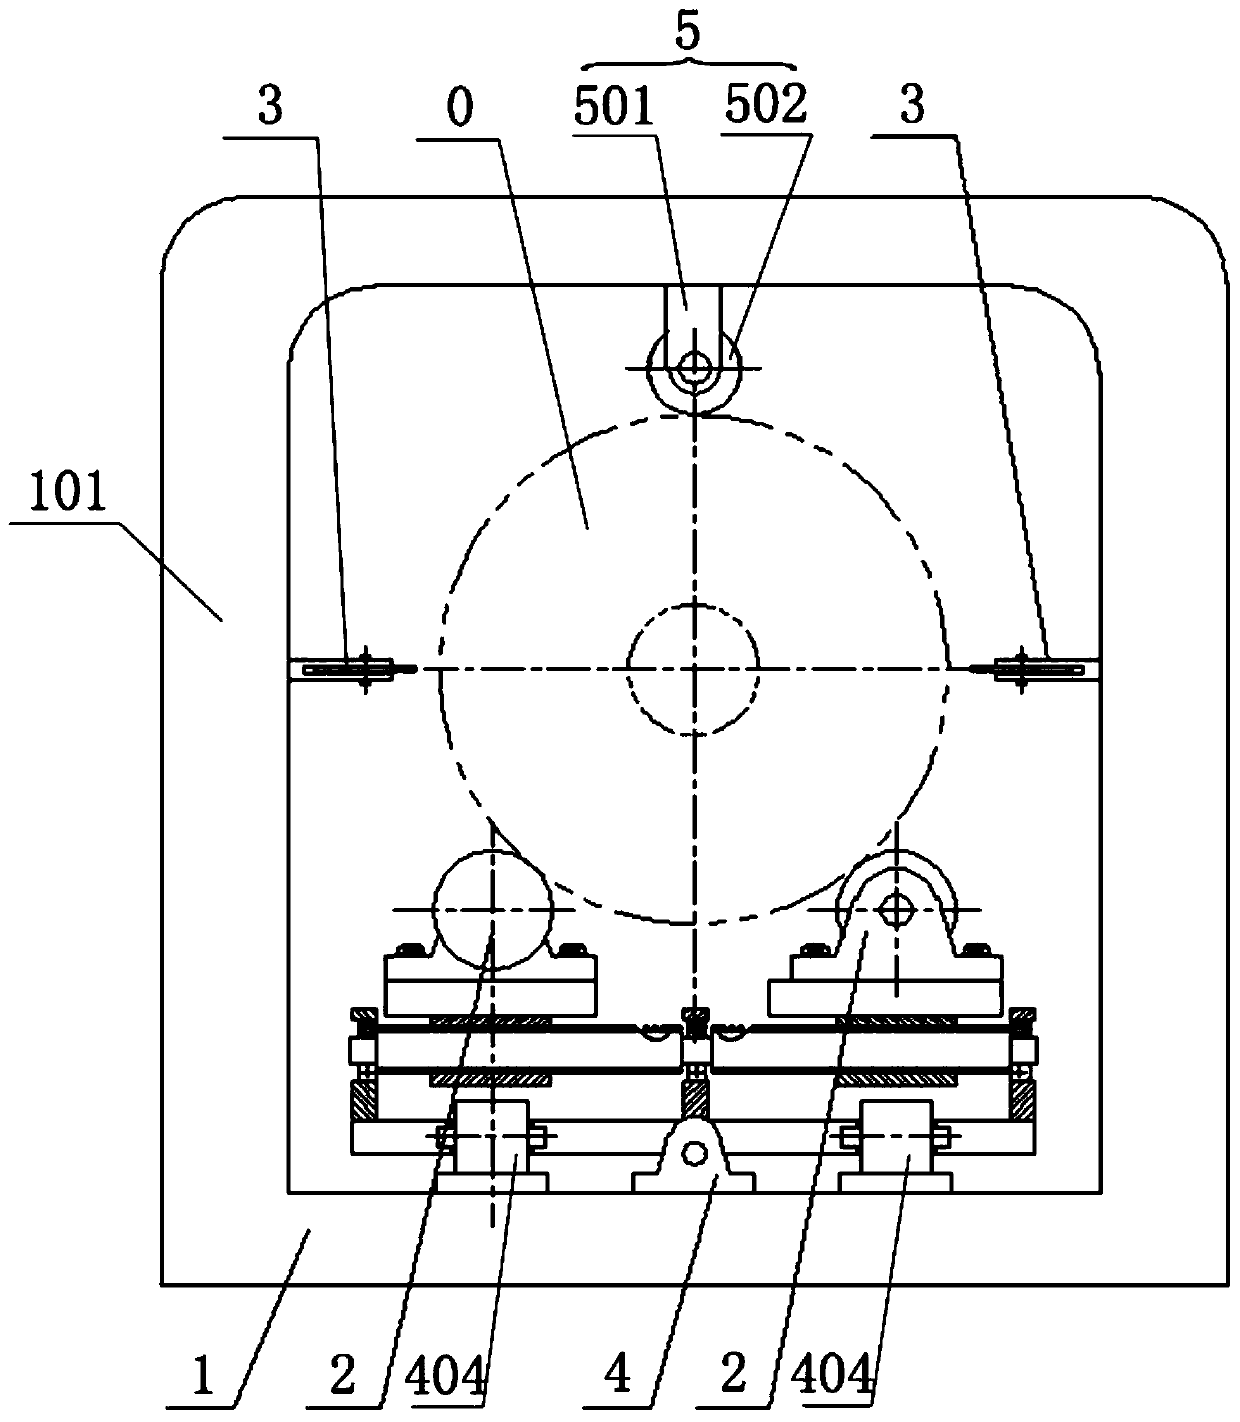 Horizontal side-arranged tensioning device for motor rotor conducting bars